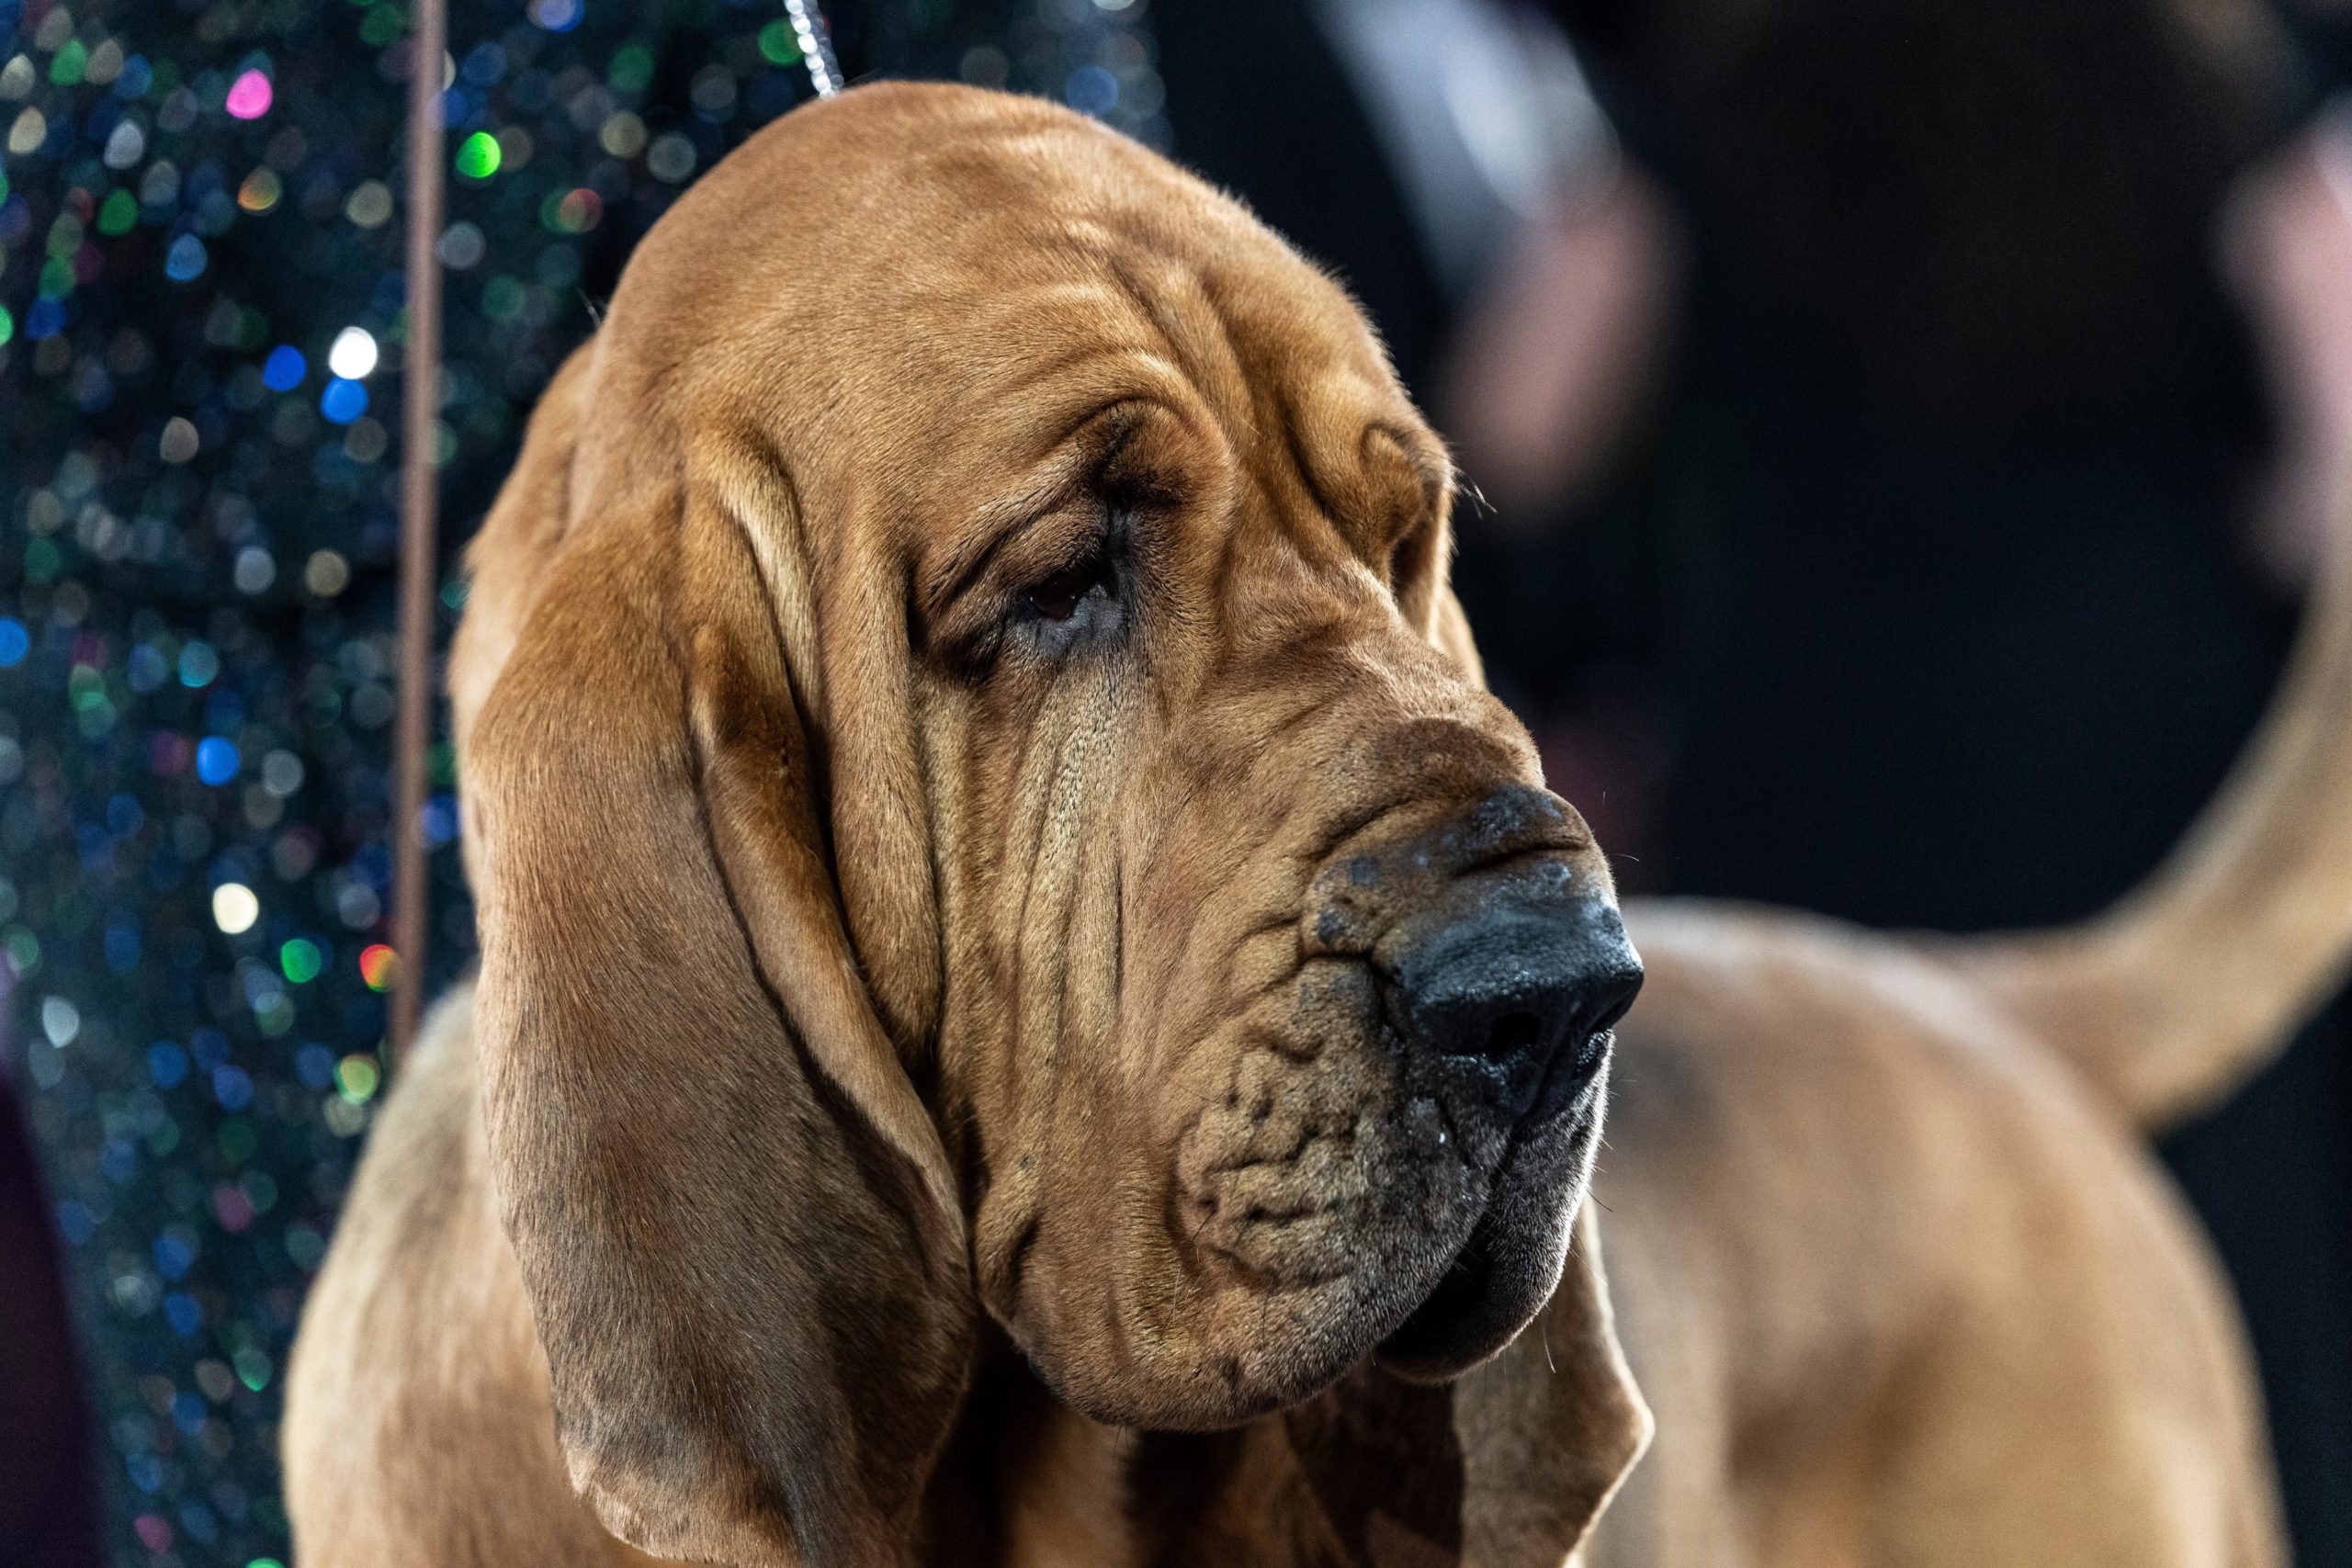 The sad reality behind the 'Best in Show' · A Humane World